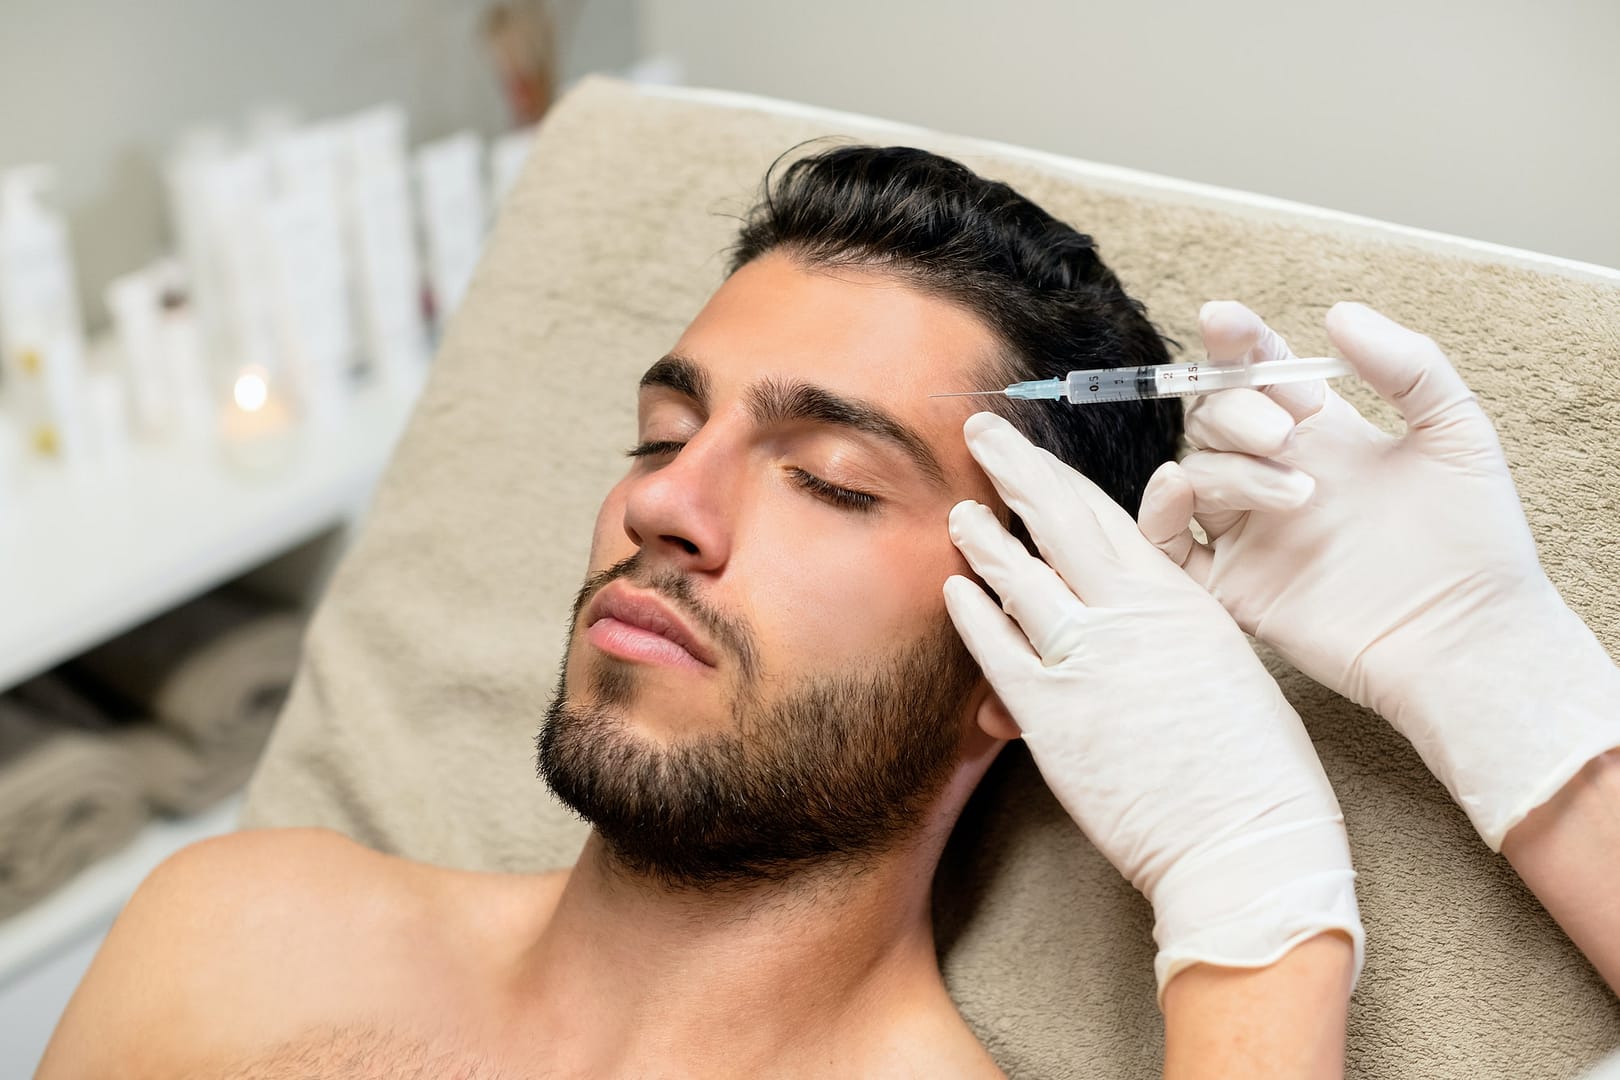 Young man receiving botox injection